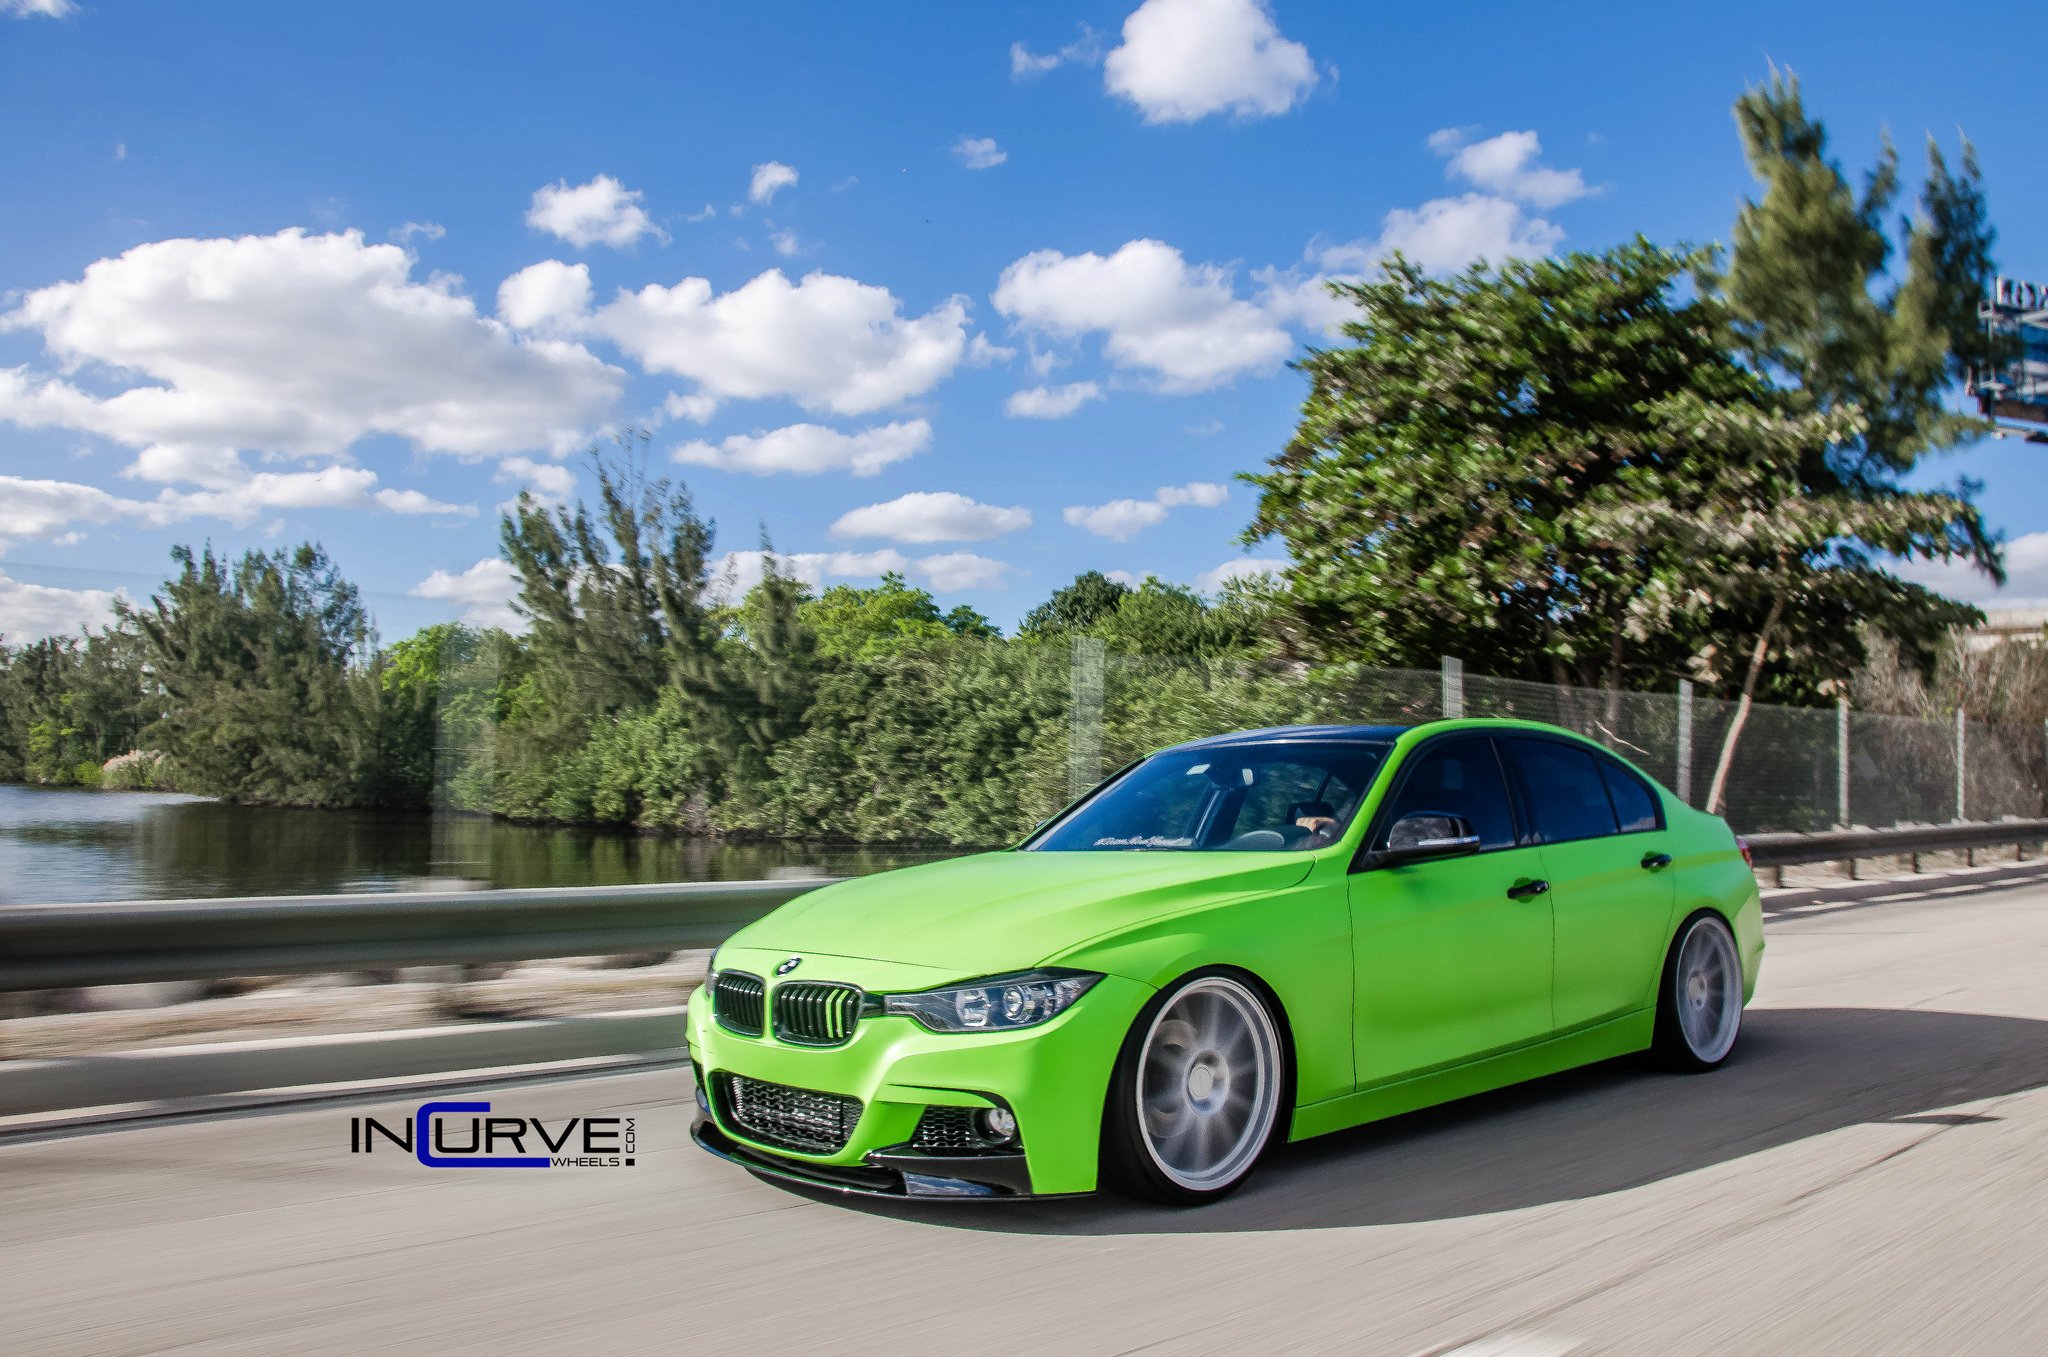 2015, Incurve, Wheels, Cars, Tuning, Bmw, F30 Wallpapers HD